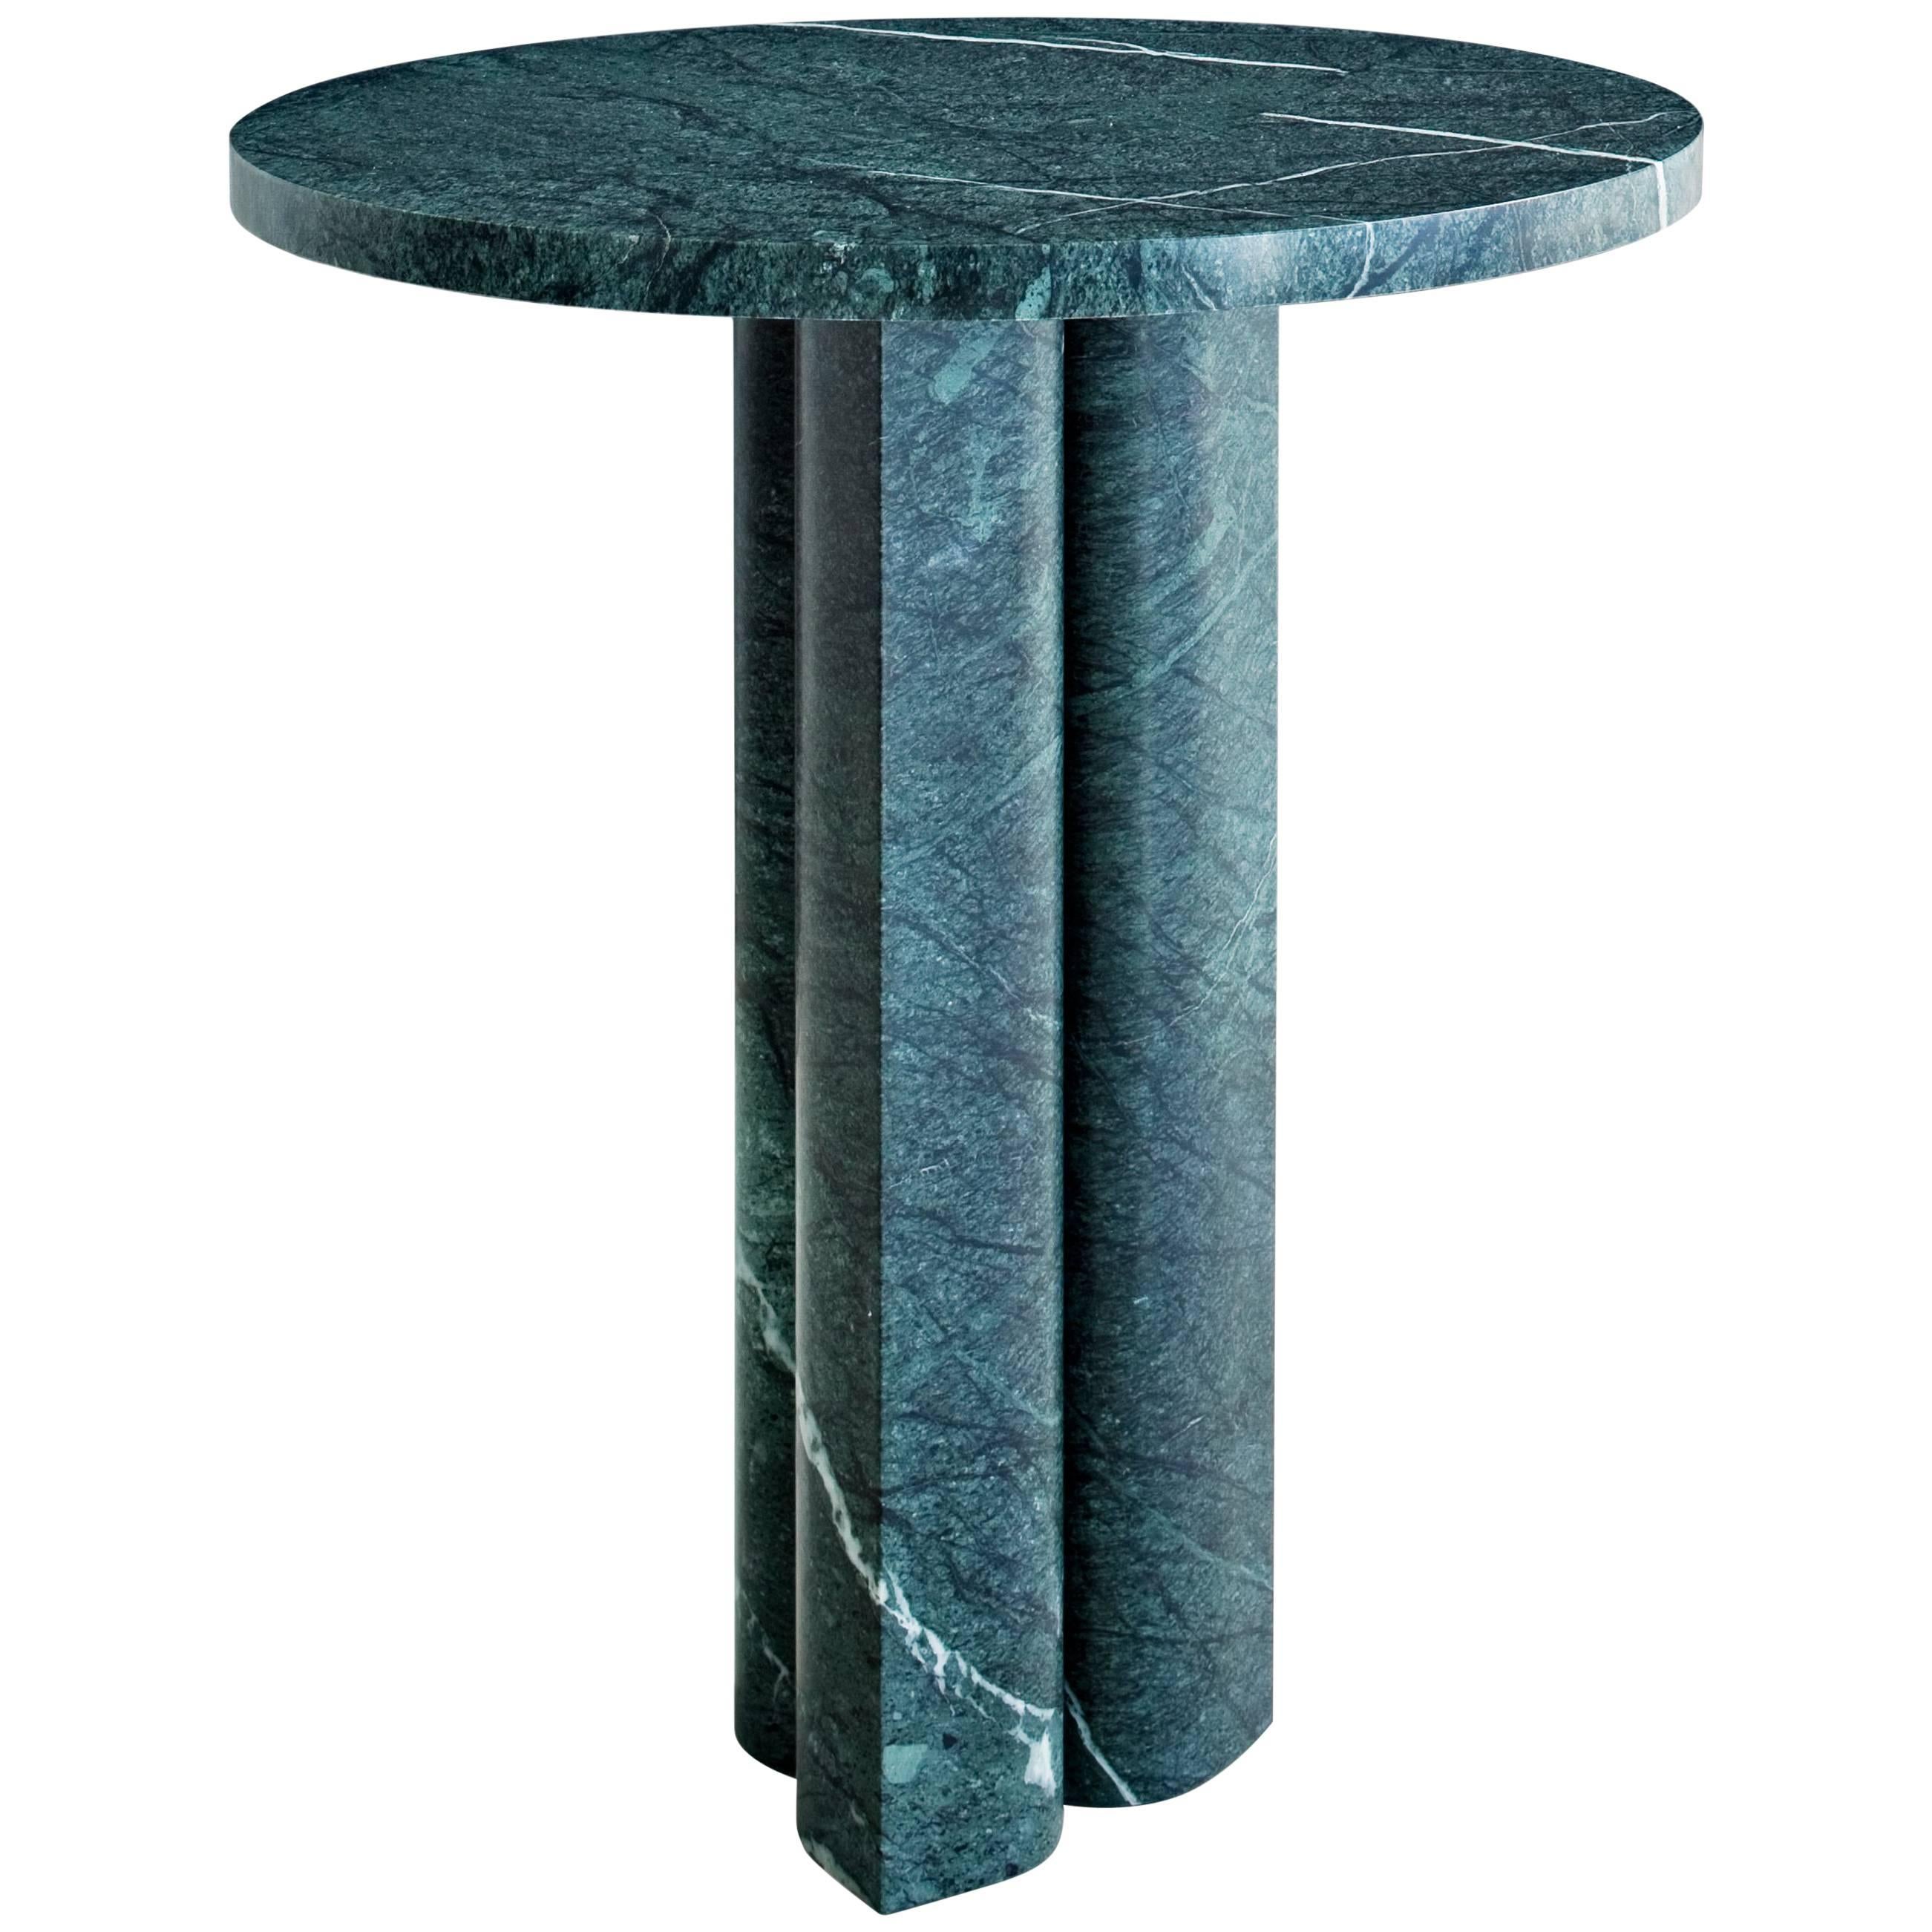 Salvatori 'Love Me, Love Me Not' Round Side Table in Verde Alpi Marble For Sale